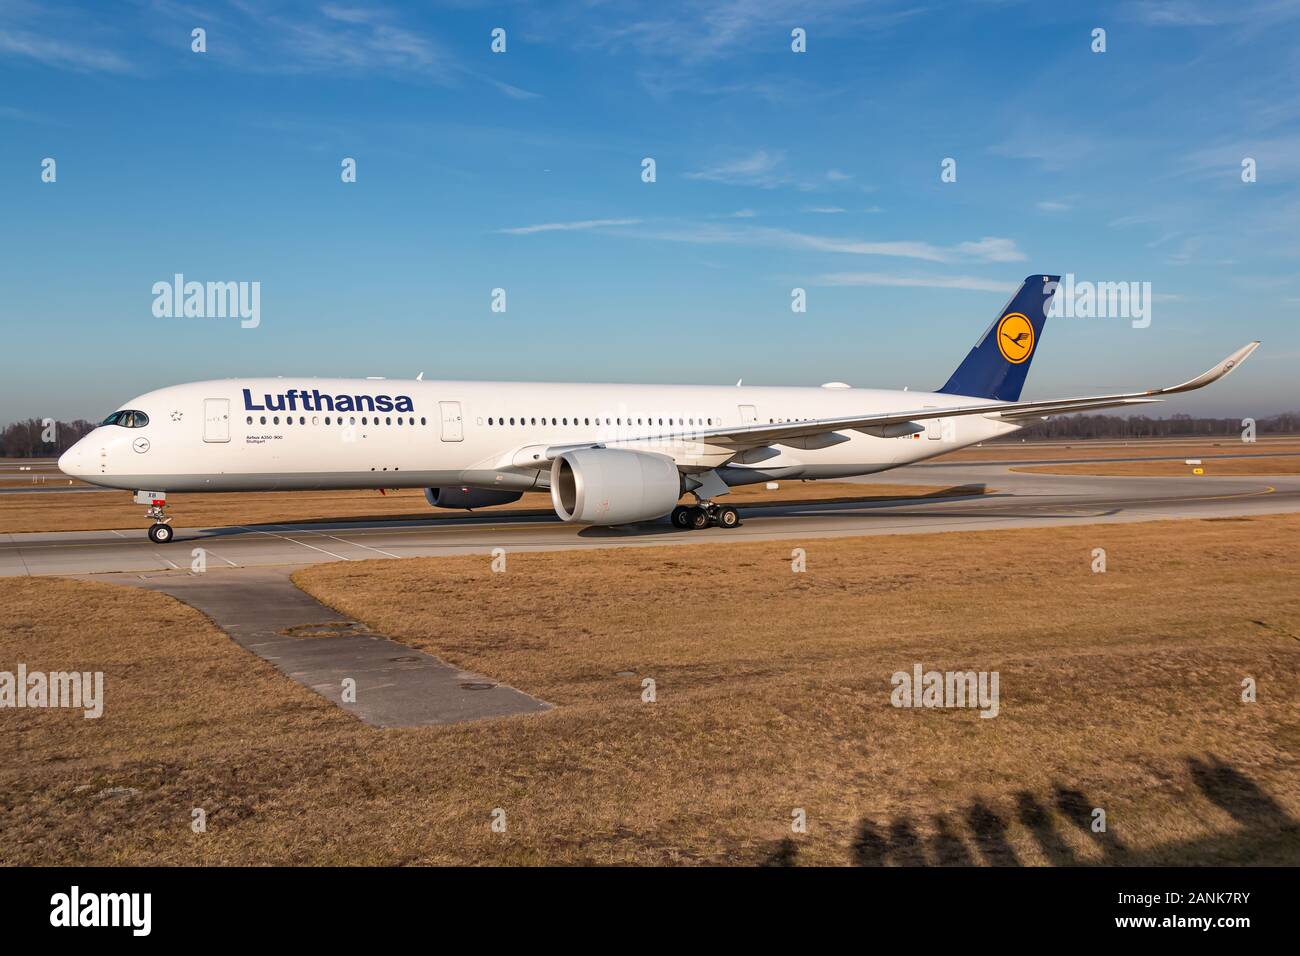 Munich, Germany - January 17, 2020: Lufthansa Airbus A350 airplane at Munich airport (MUC) in Germany. Airbus is an aircraft manufacturer from Toulous Stock Photo